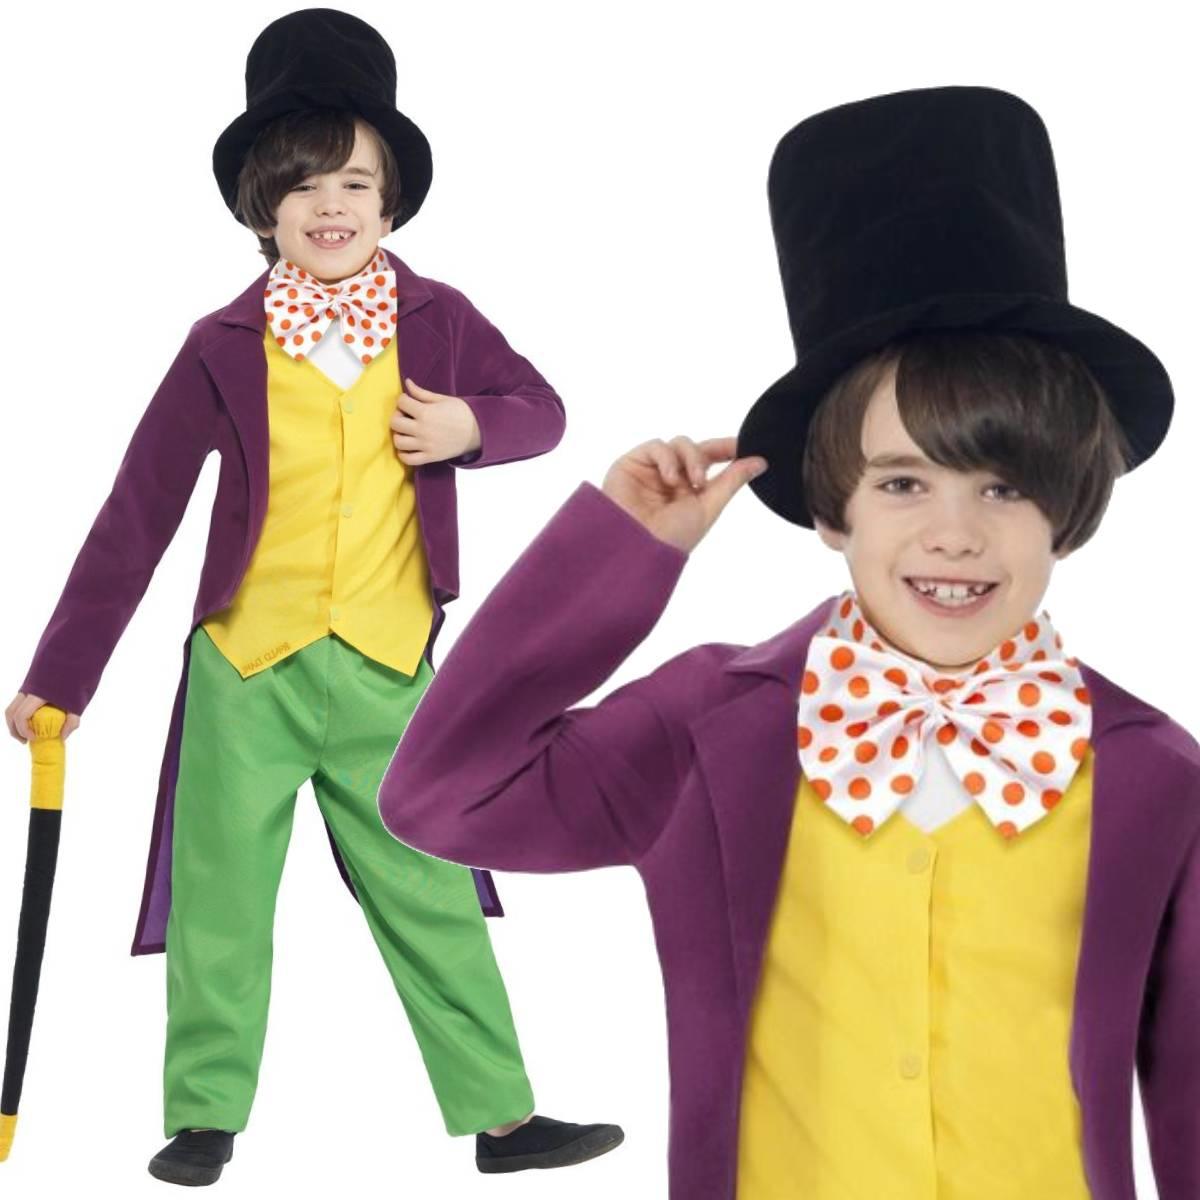 Official Willy Wonka Fancy Dress Costume for Boys by Smiffys 27141  available in sizes medium and large from Karnival Costumes